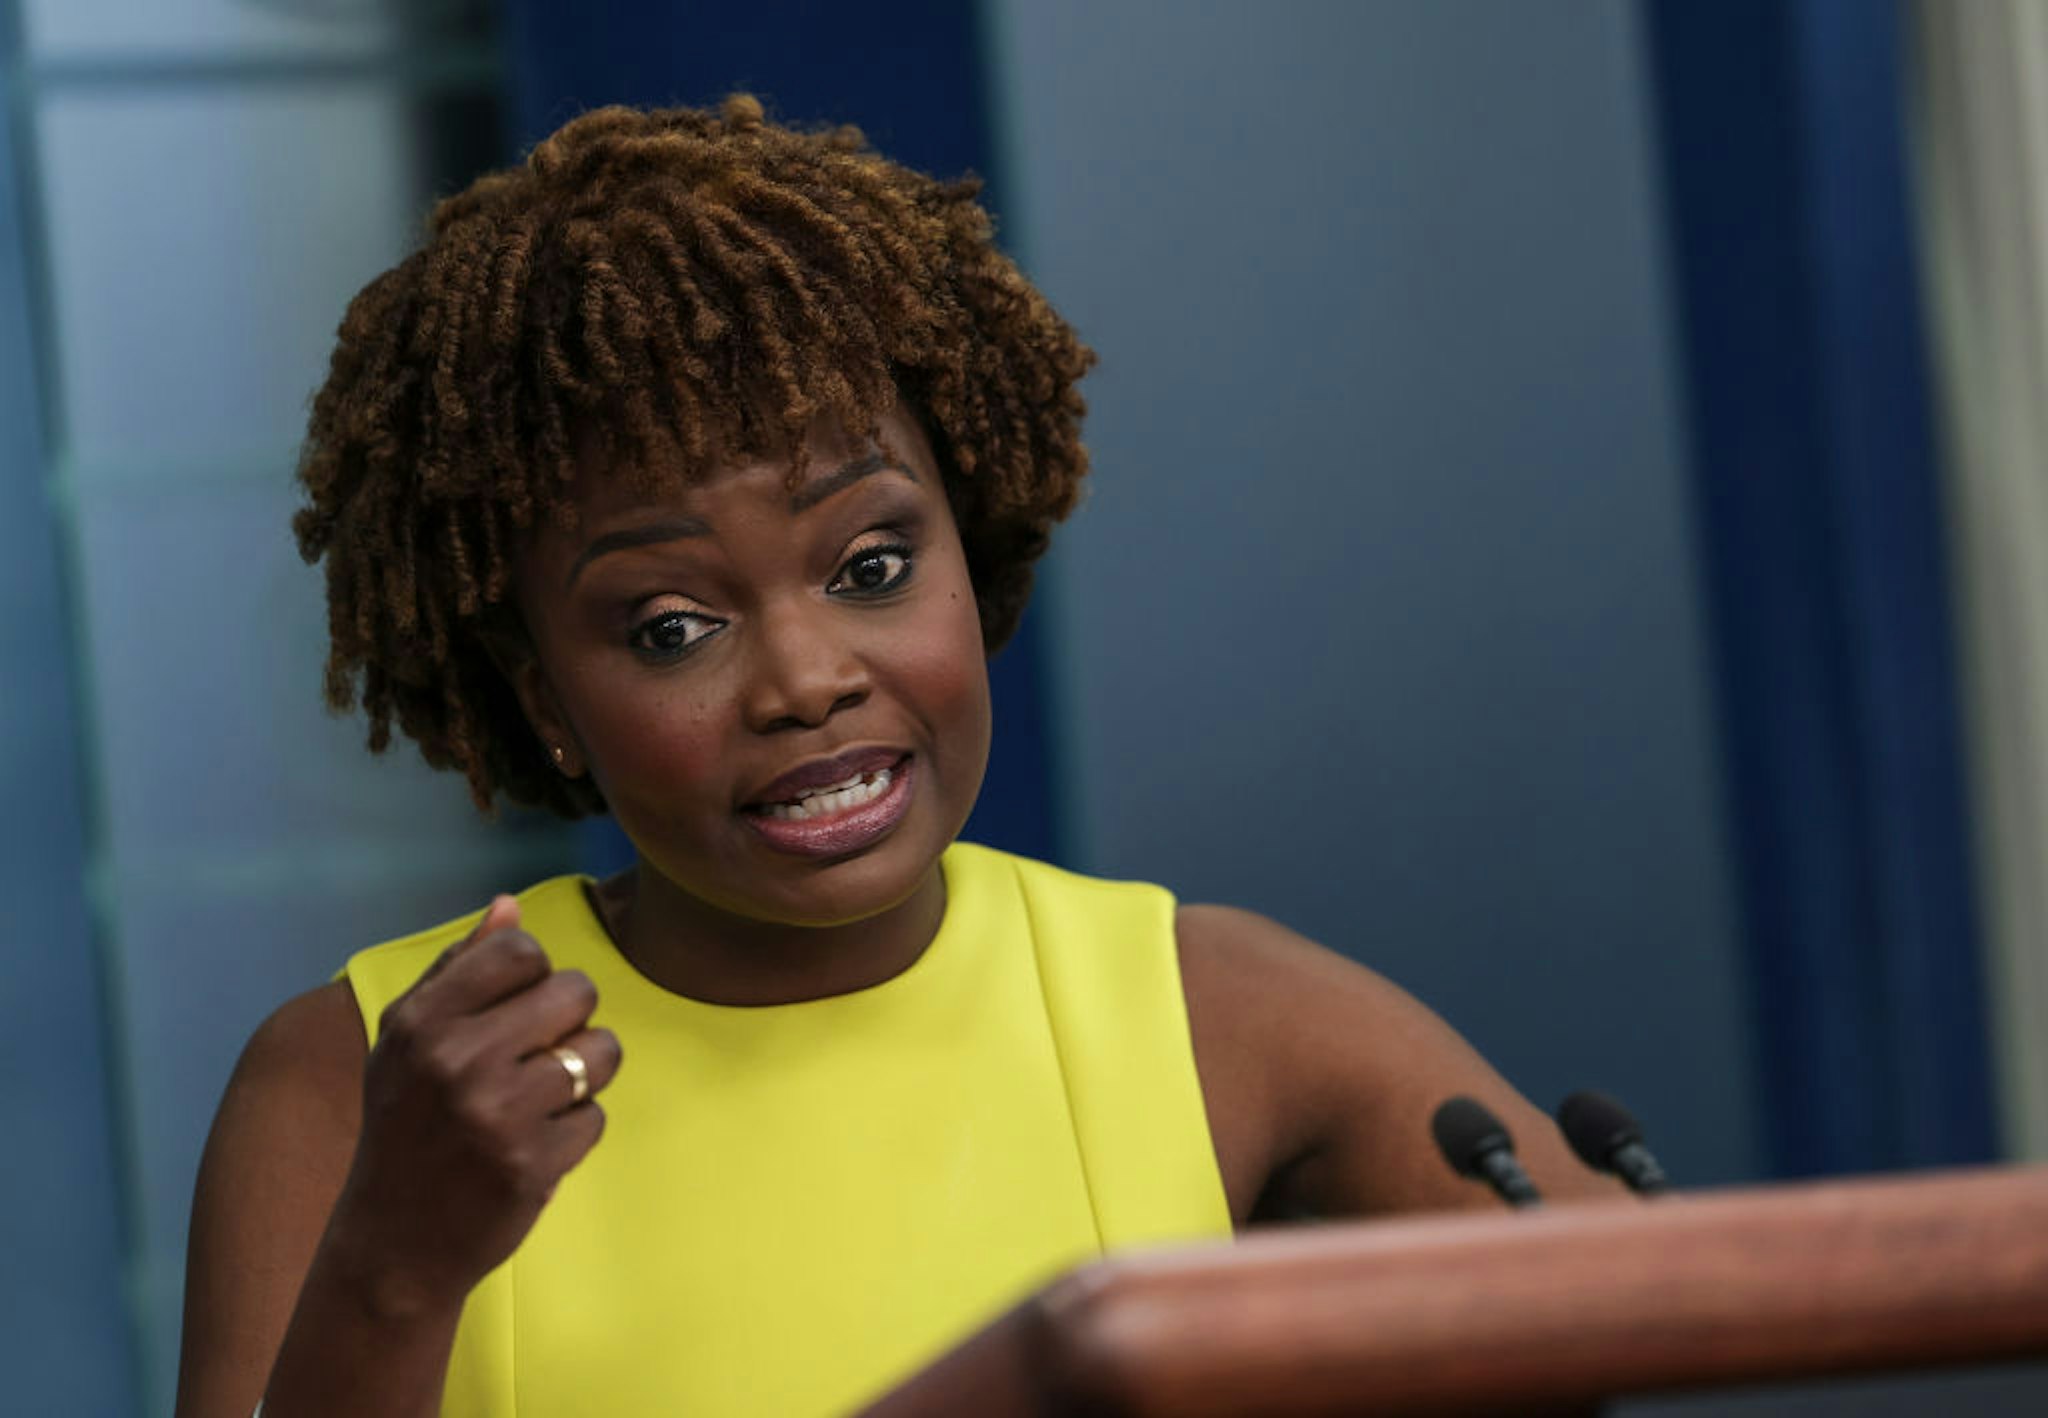 WASHINGTON, DC - JUNE 02: White House Press Secretary Karine Jean-Pierre addresses reporters during the daily press briefing at the White House on June 02, 2022 in Washington, DC. Jean-Pierre spoke on gun control, inflation and the economy and the ongoing baby formula shortage. (Photo by Kevin Dietsch/Getty Images)